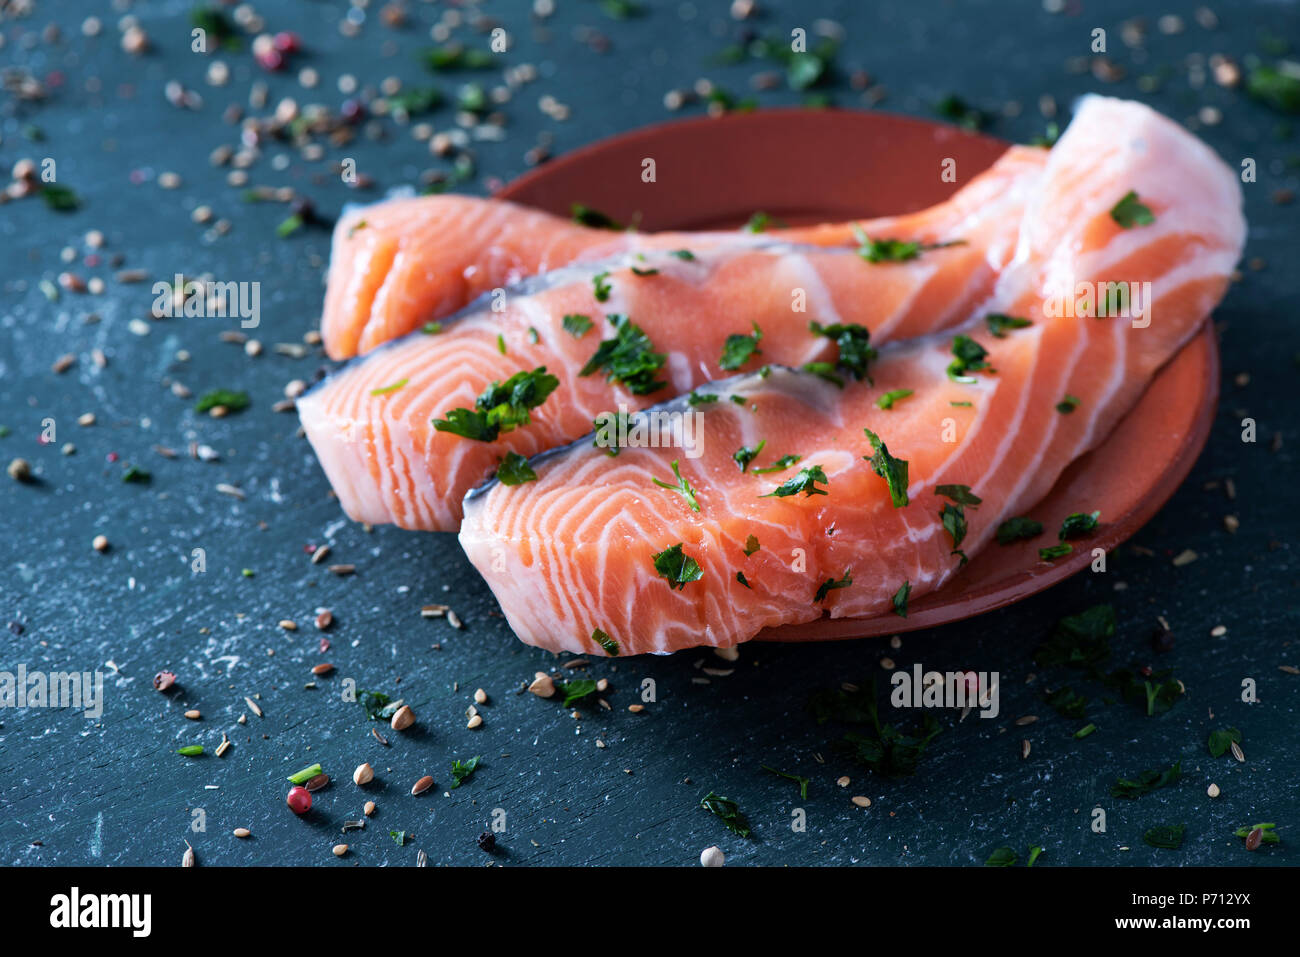 closeup of some slices of raw salmon on a white marble tray, on a dark rustic surface sprinkled with herbs and spices Stock Photo